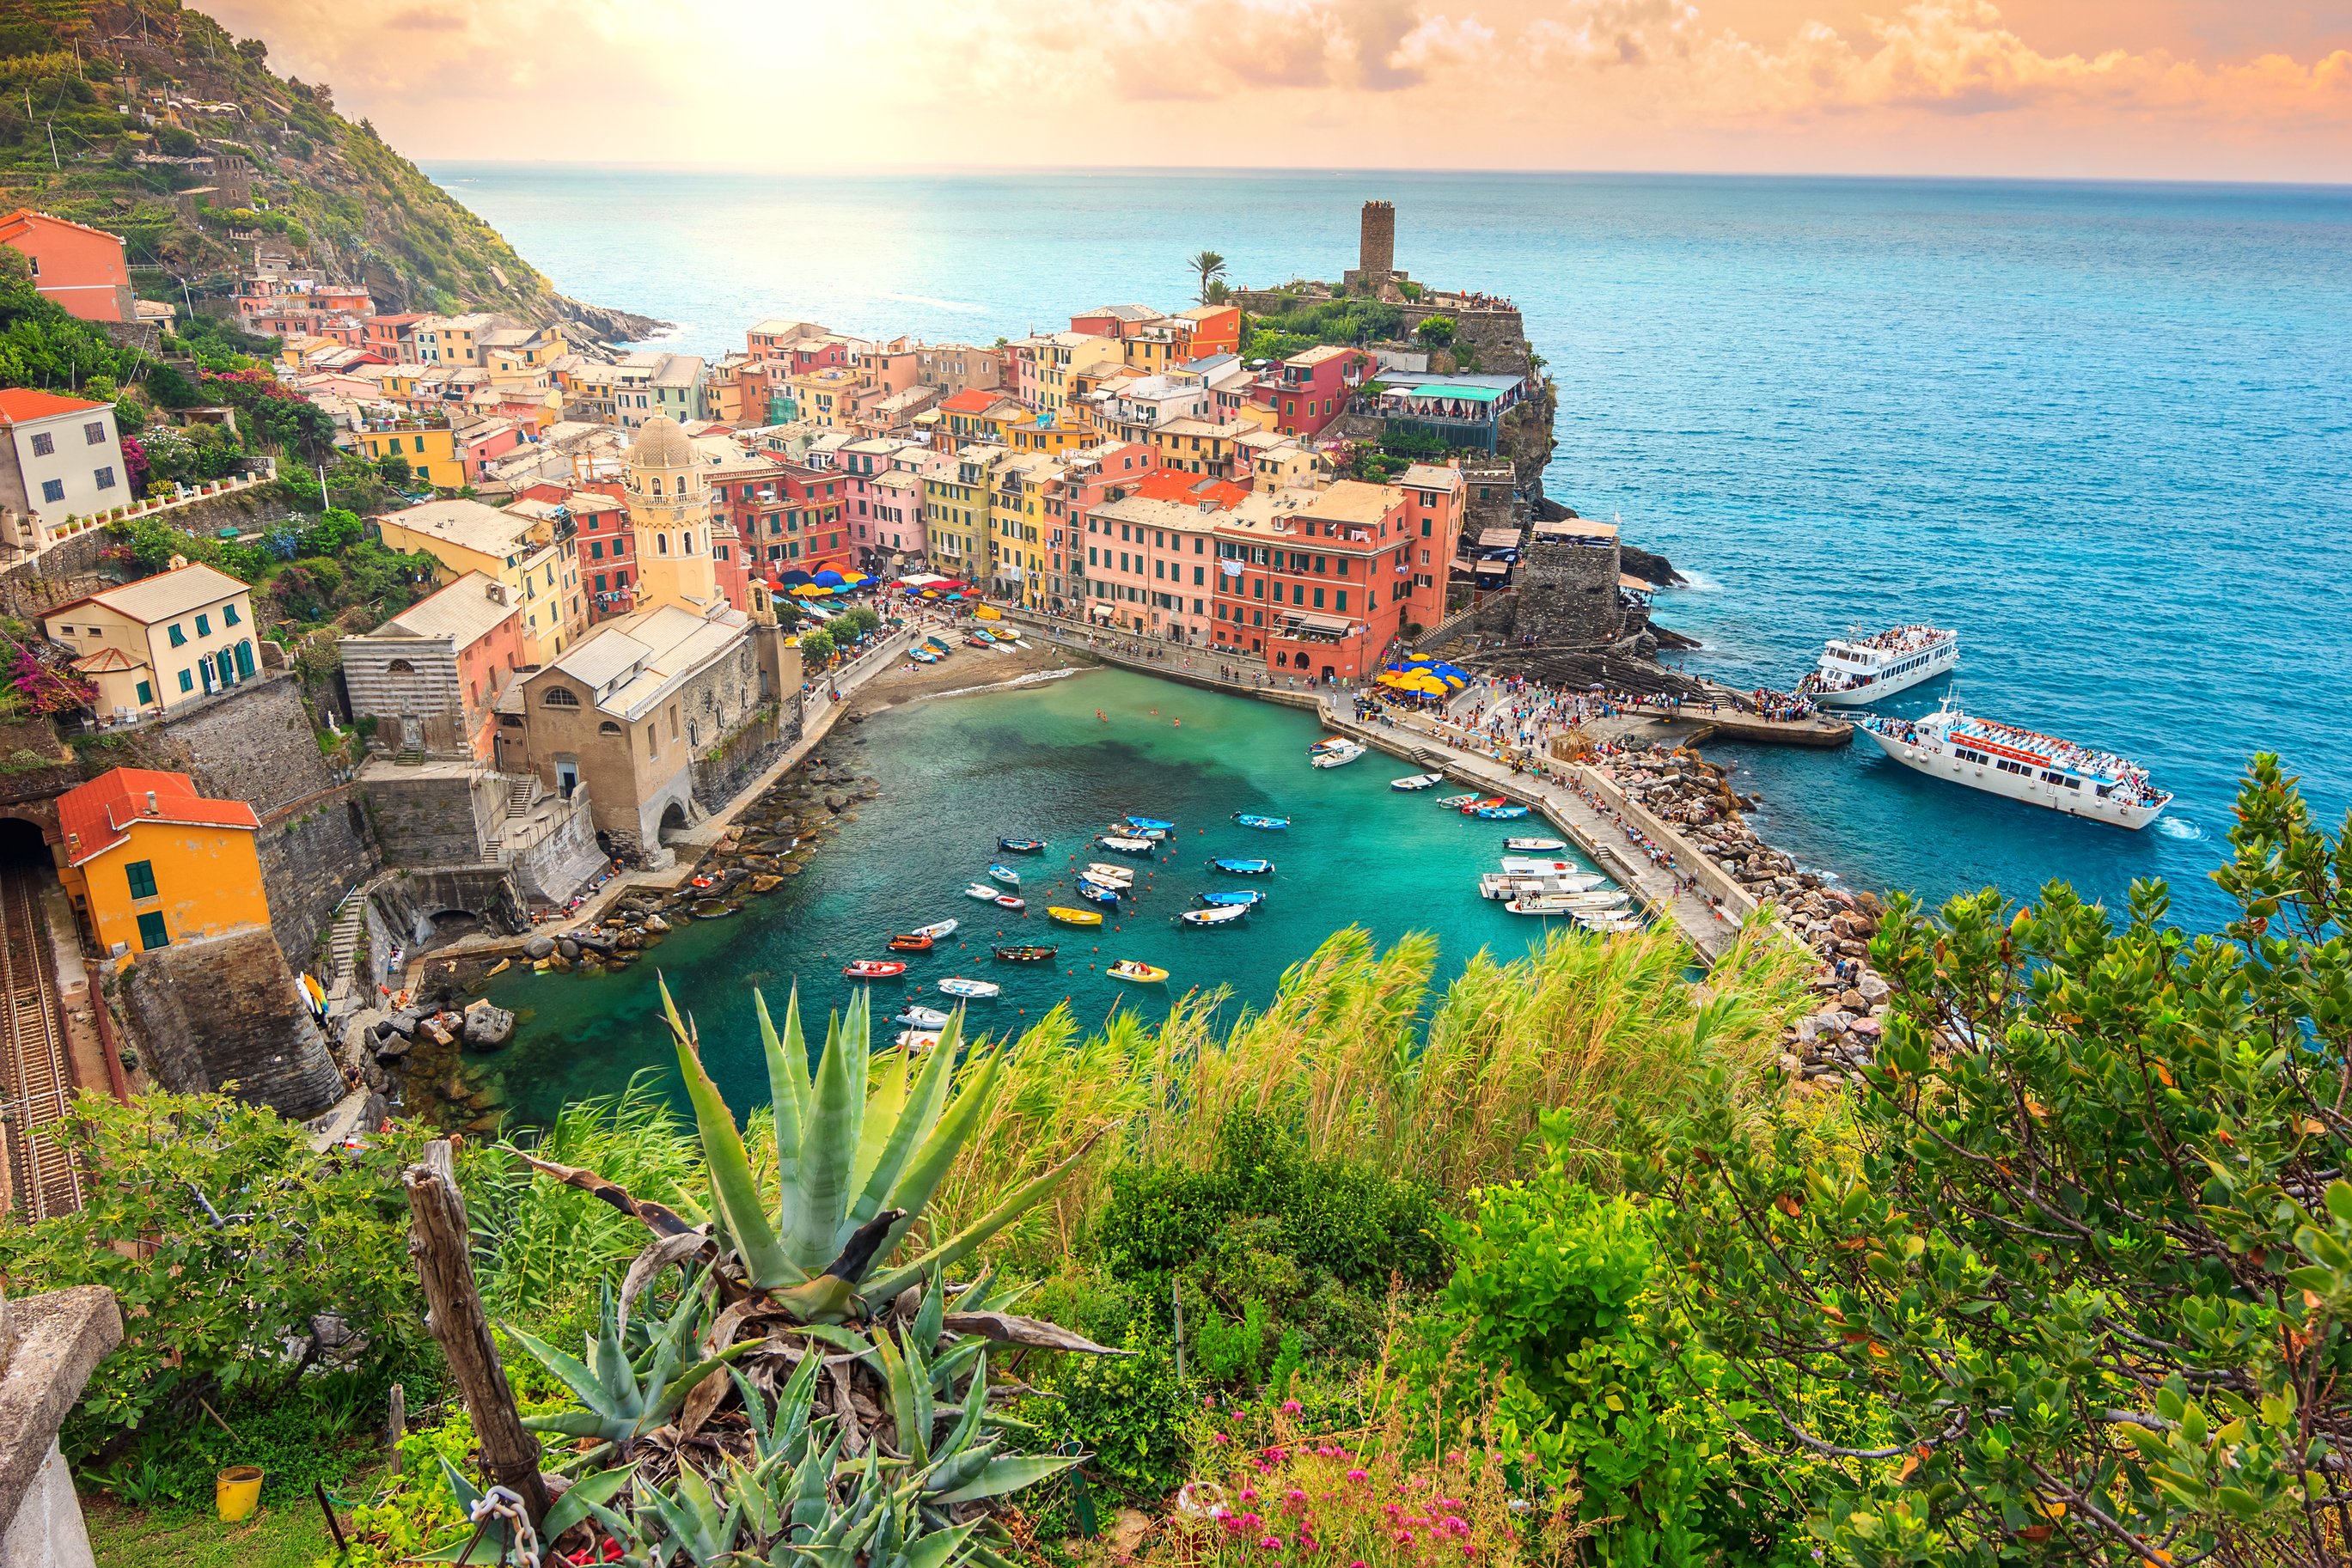 Flights to Europe in the $300s & $400s round-trip!